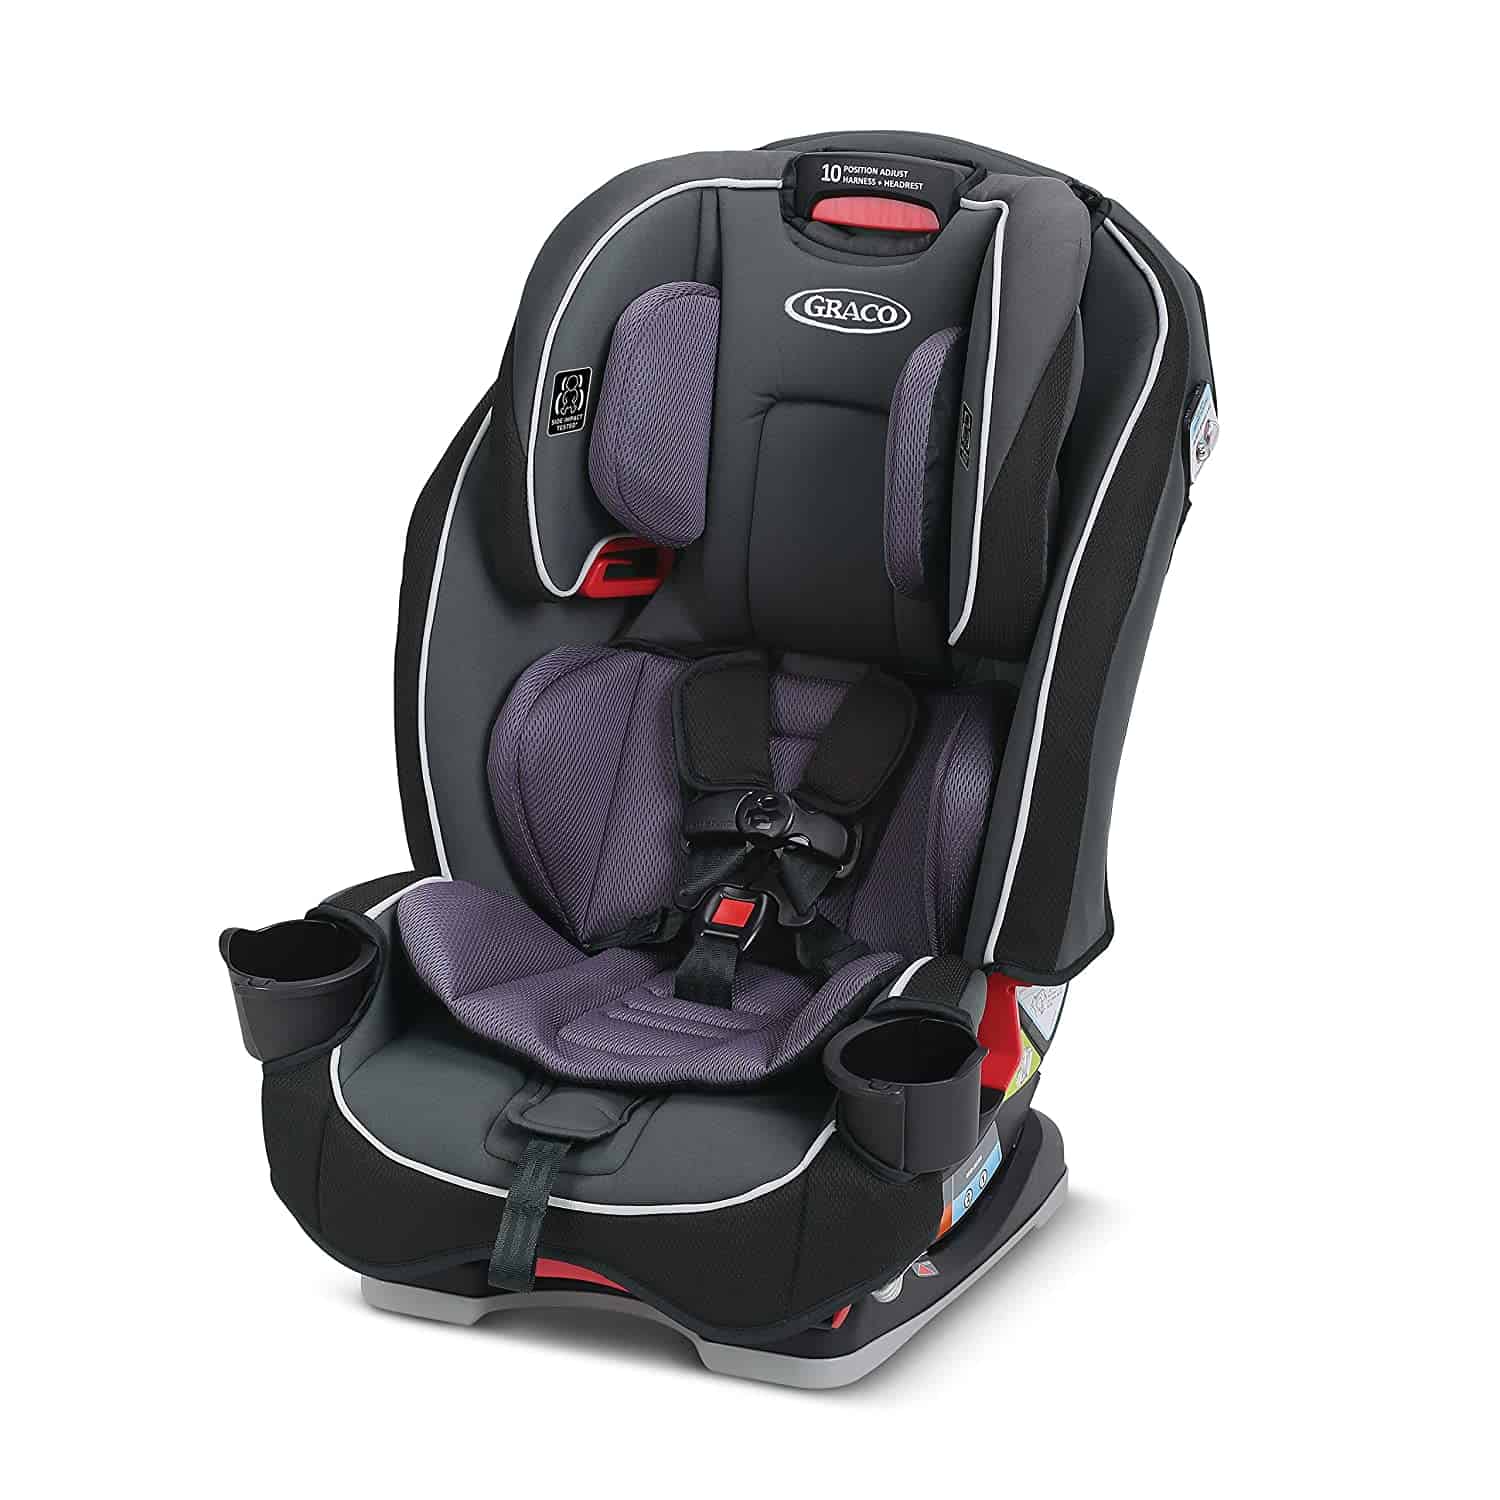 Amazon: Graco SlimFit 3-in-1 Car Seat ONLY $126.39 {Reg $200}